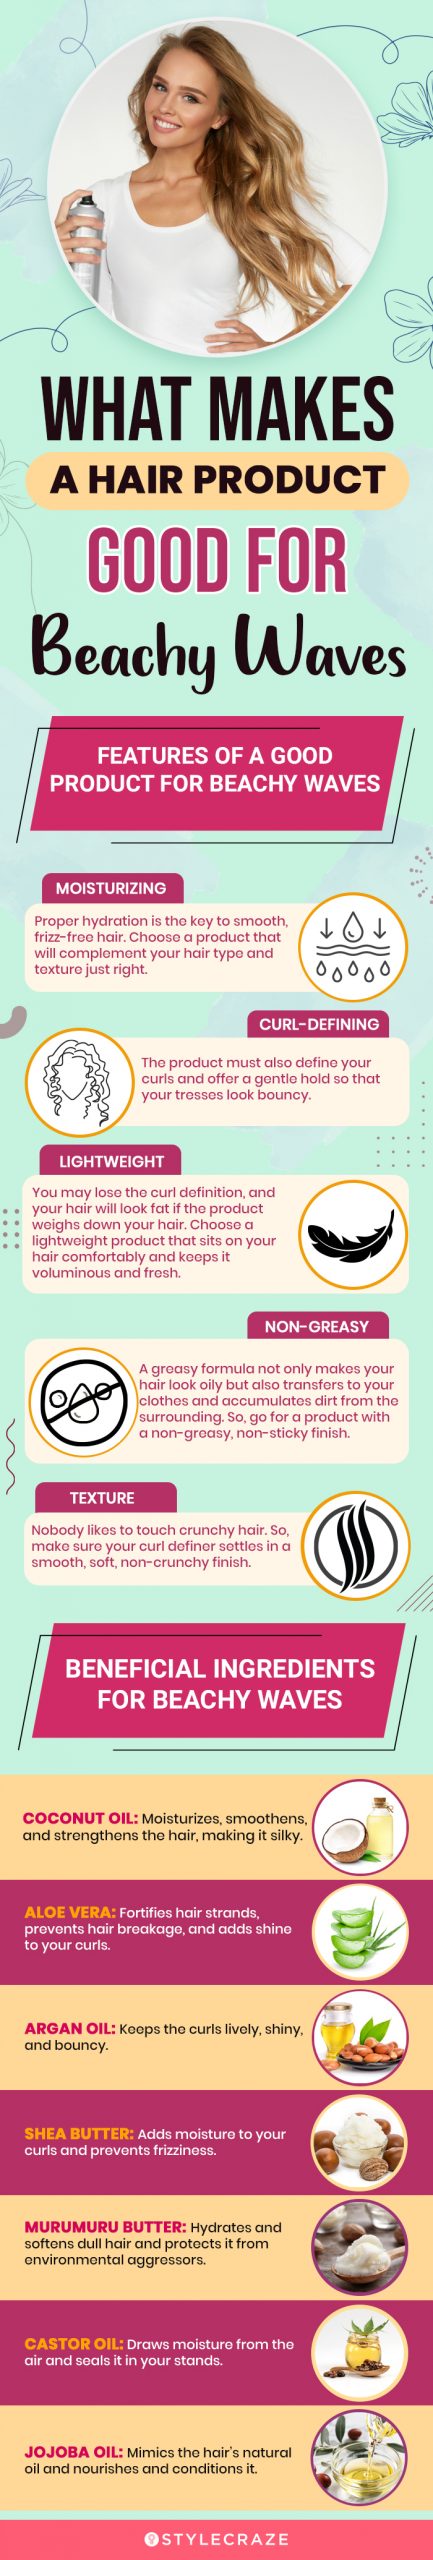  What Makes A Hair Product Good For Beachy Waves [infographic]